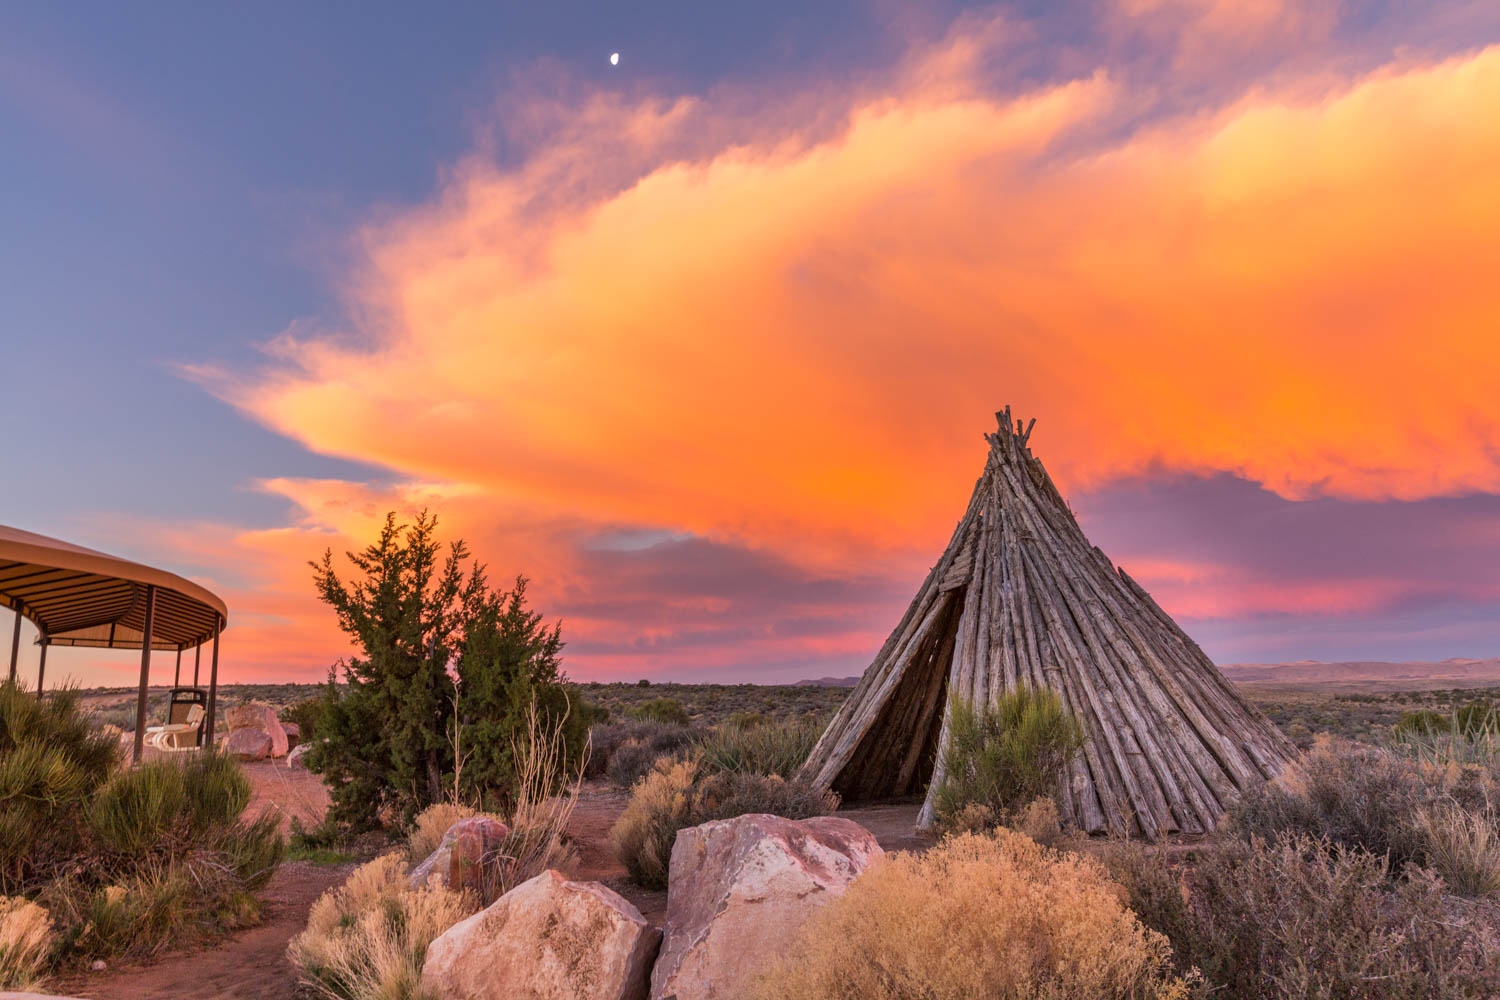 At the Native American Village at Eagle Point, you can walk down a path and see authentic dwellings made by Navajo, Hopi, Plains, Havasupai, and Hualapai Tribal members—you’re welcome to go inside. Several wooden poles have been carved with the likenesses of Hualapai members. Photo courtesy Grand Canyon Resort Corporation.